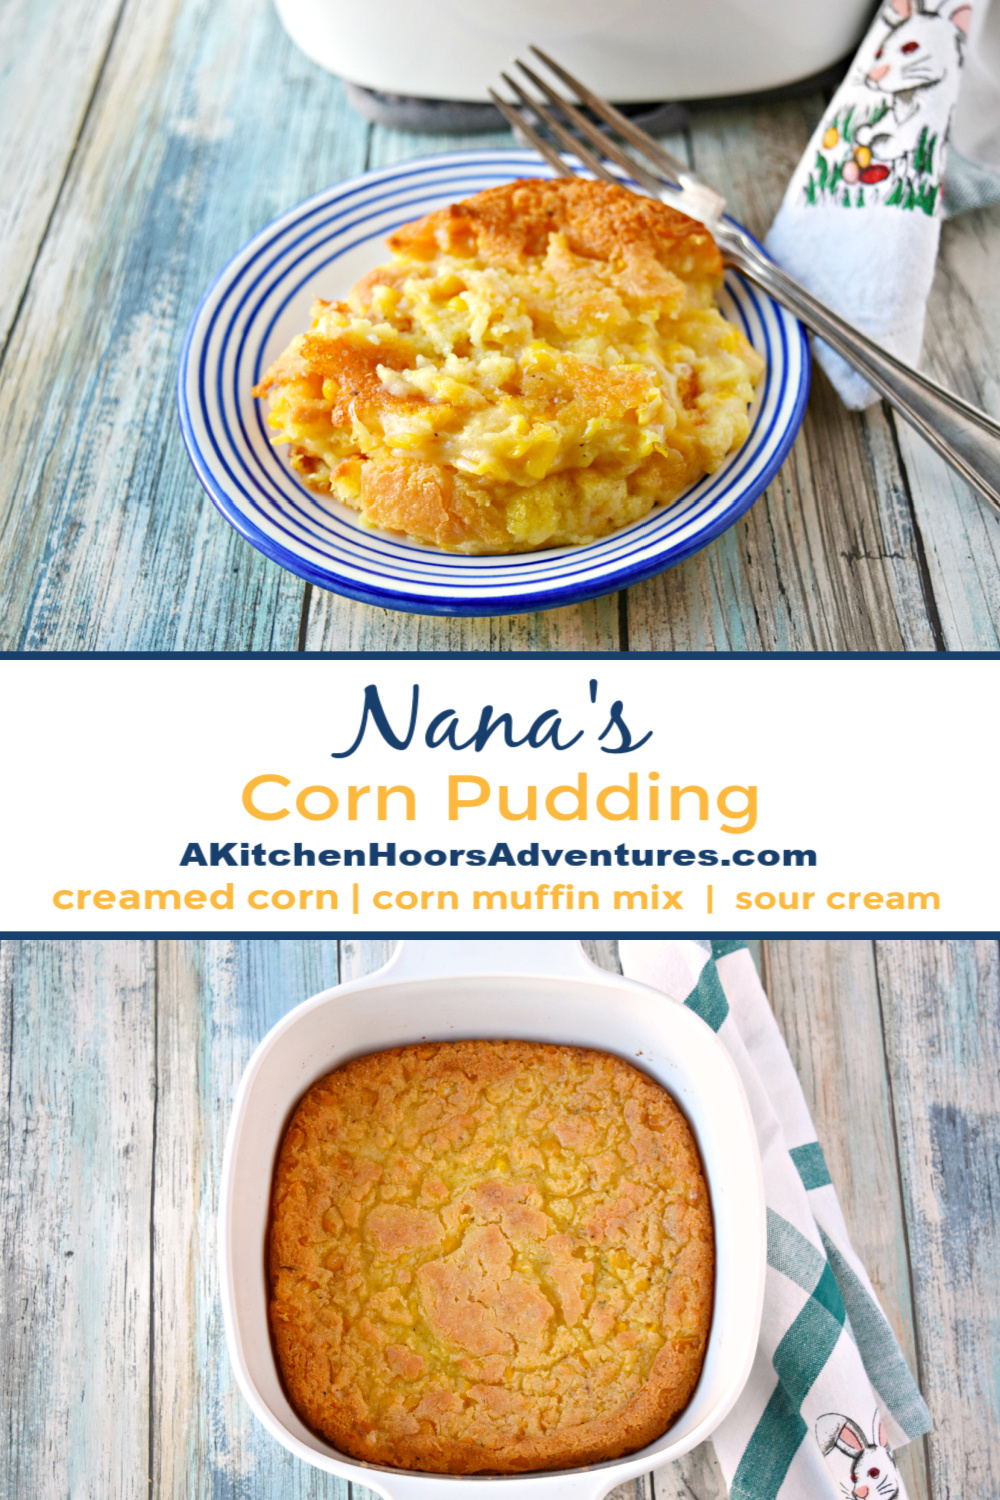 With just five ingredients and less than 5 minutes of prep tie. This is one of my favorite easy Easter side dishes. Nana's Corn Pudding is packed with sweet corn flavor and the perfect side for any holiday. #SundaySupper #Easter #easyside #sidedish